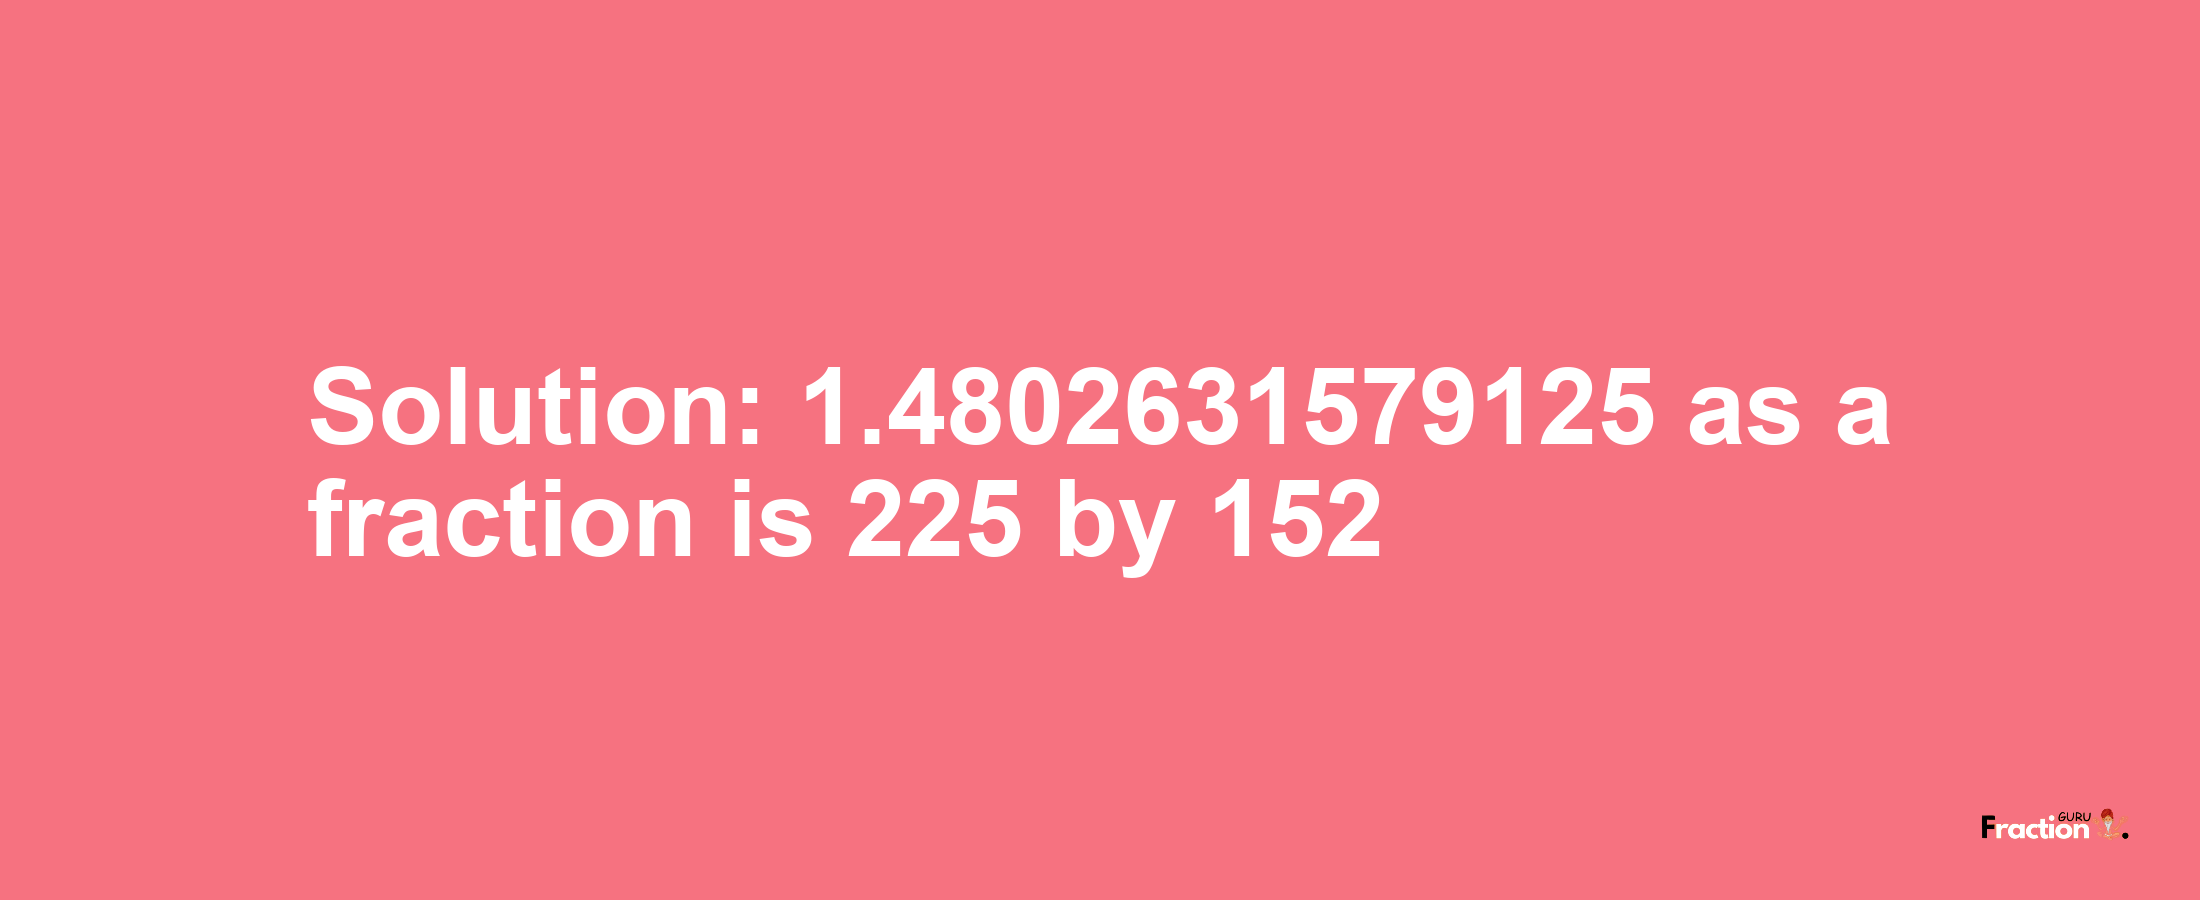 Solution:1.4802631579125 as a fraction is 225/152